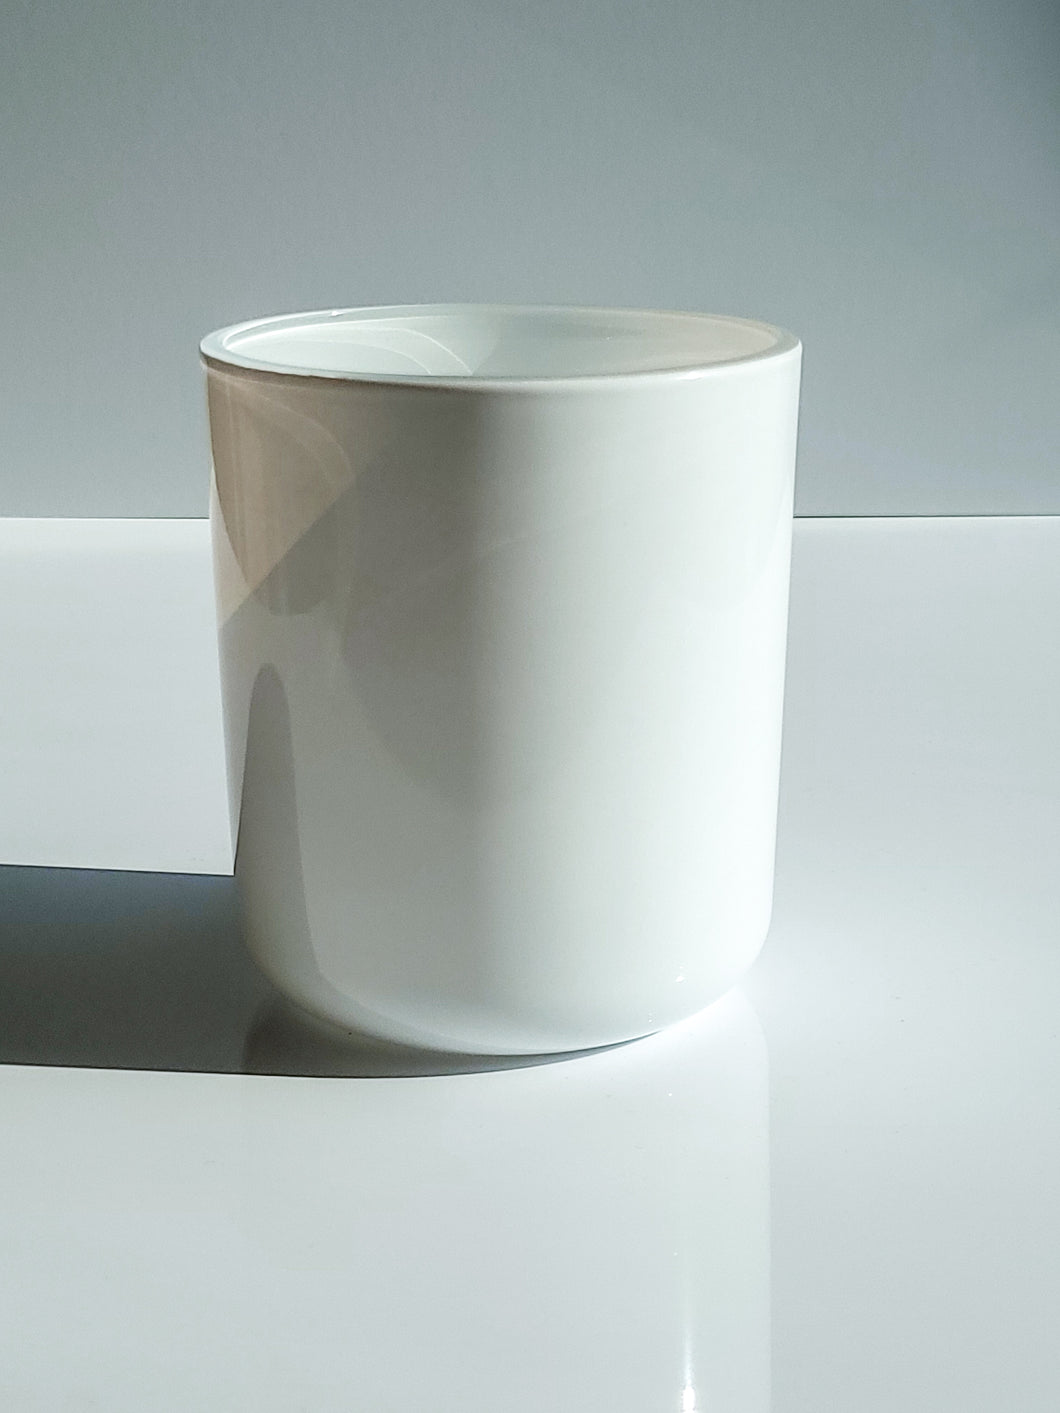 Craftsman - Case of 24 - White Gloss Candle Vessel